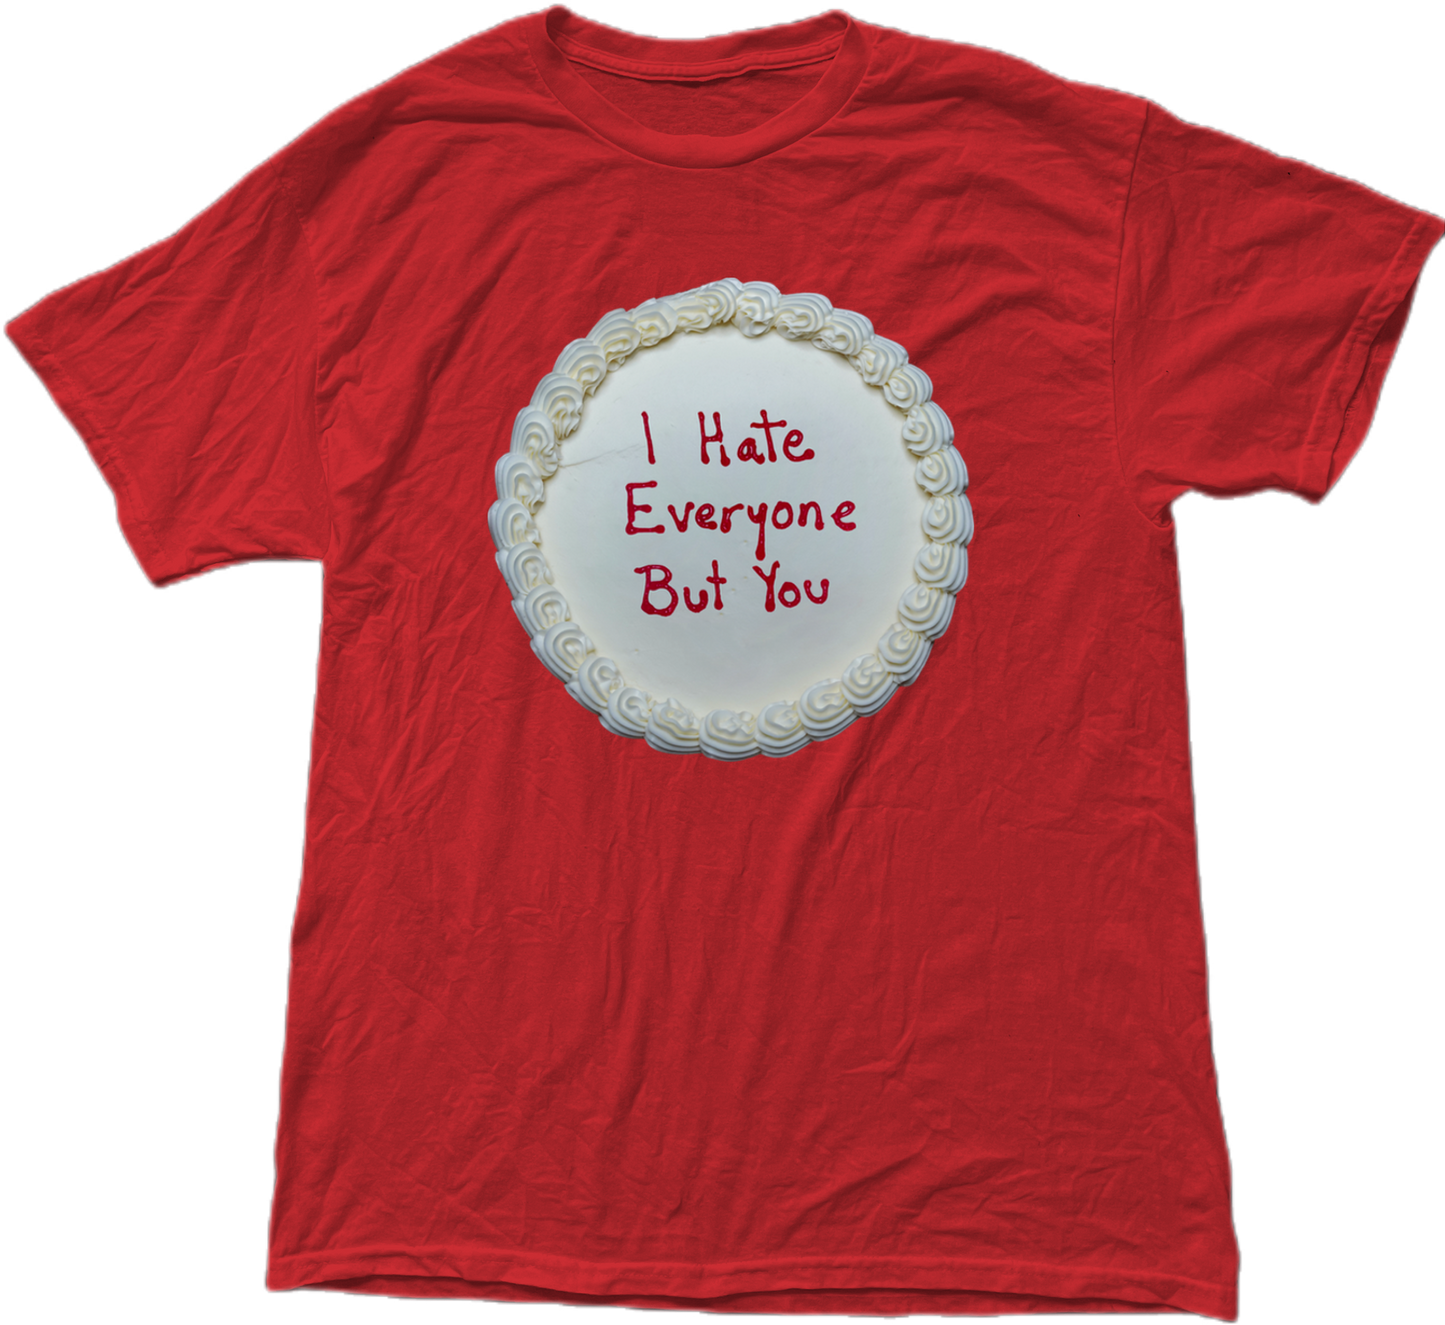 I HATE EVERYONE BUT YOU TSHIRT RED